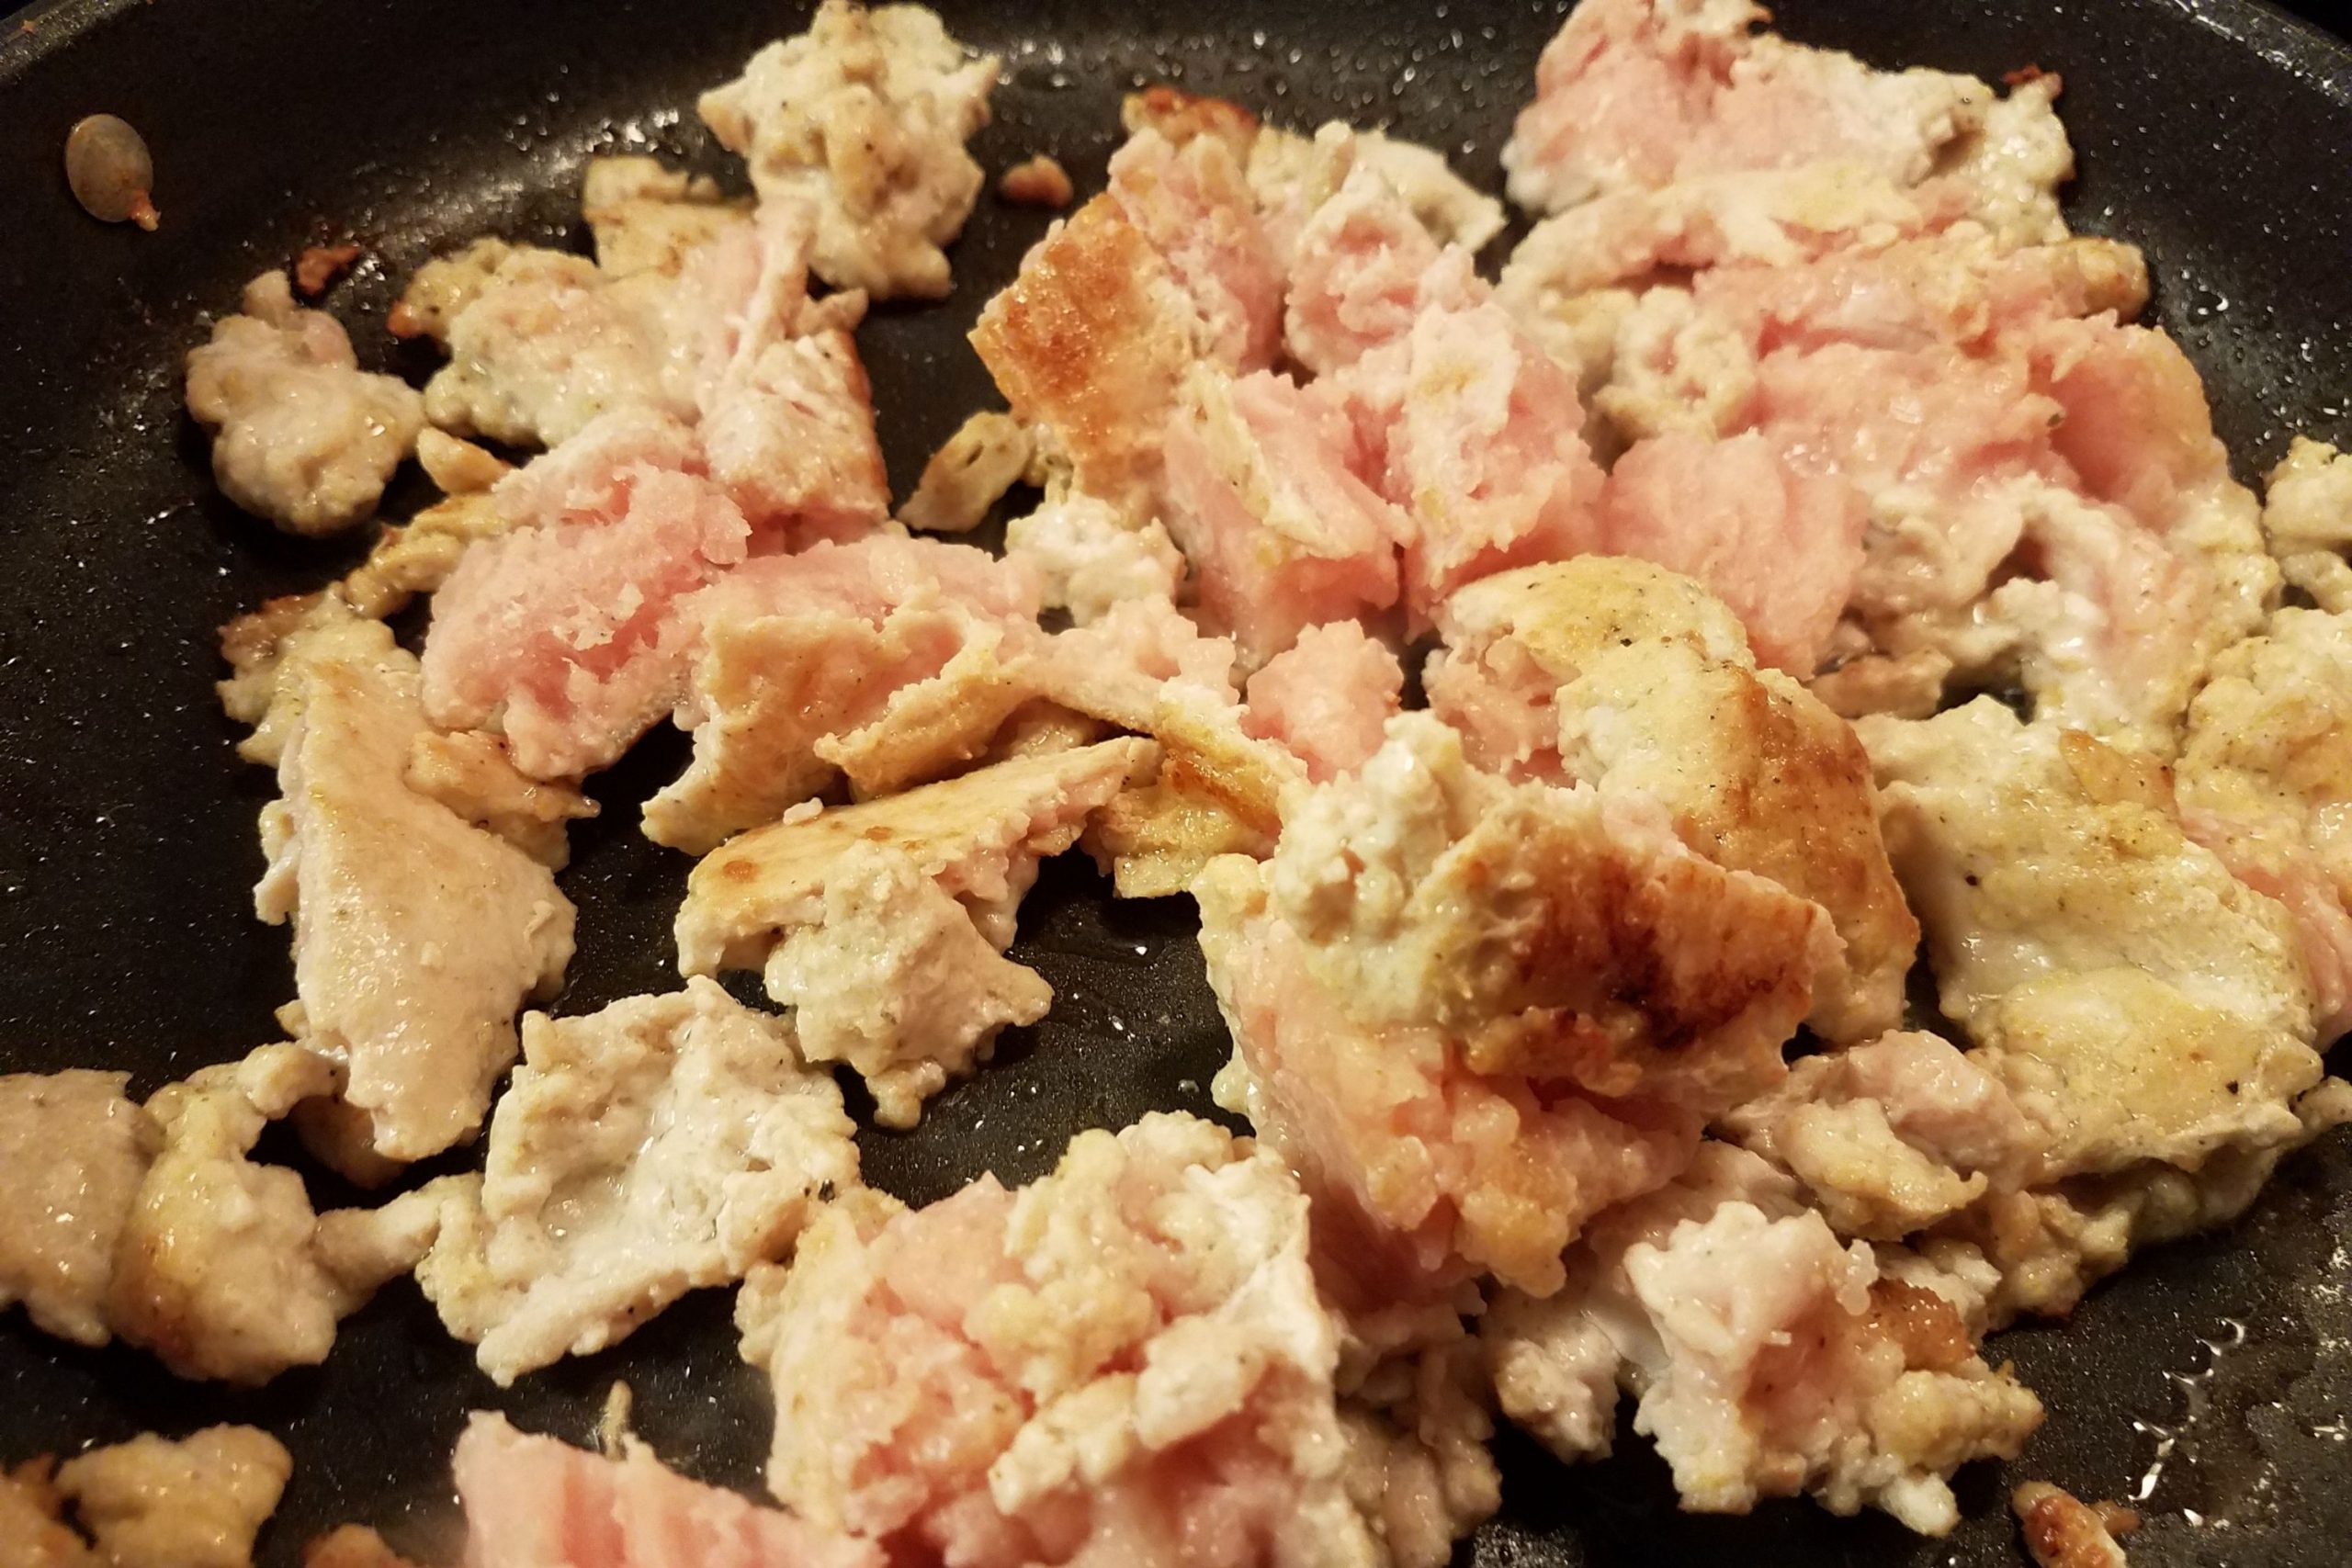 How to Use Cooked Ground Turkey Leftovers